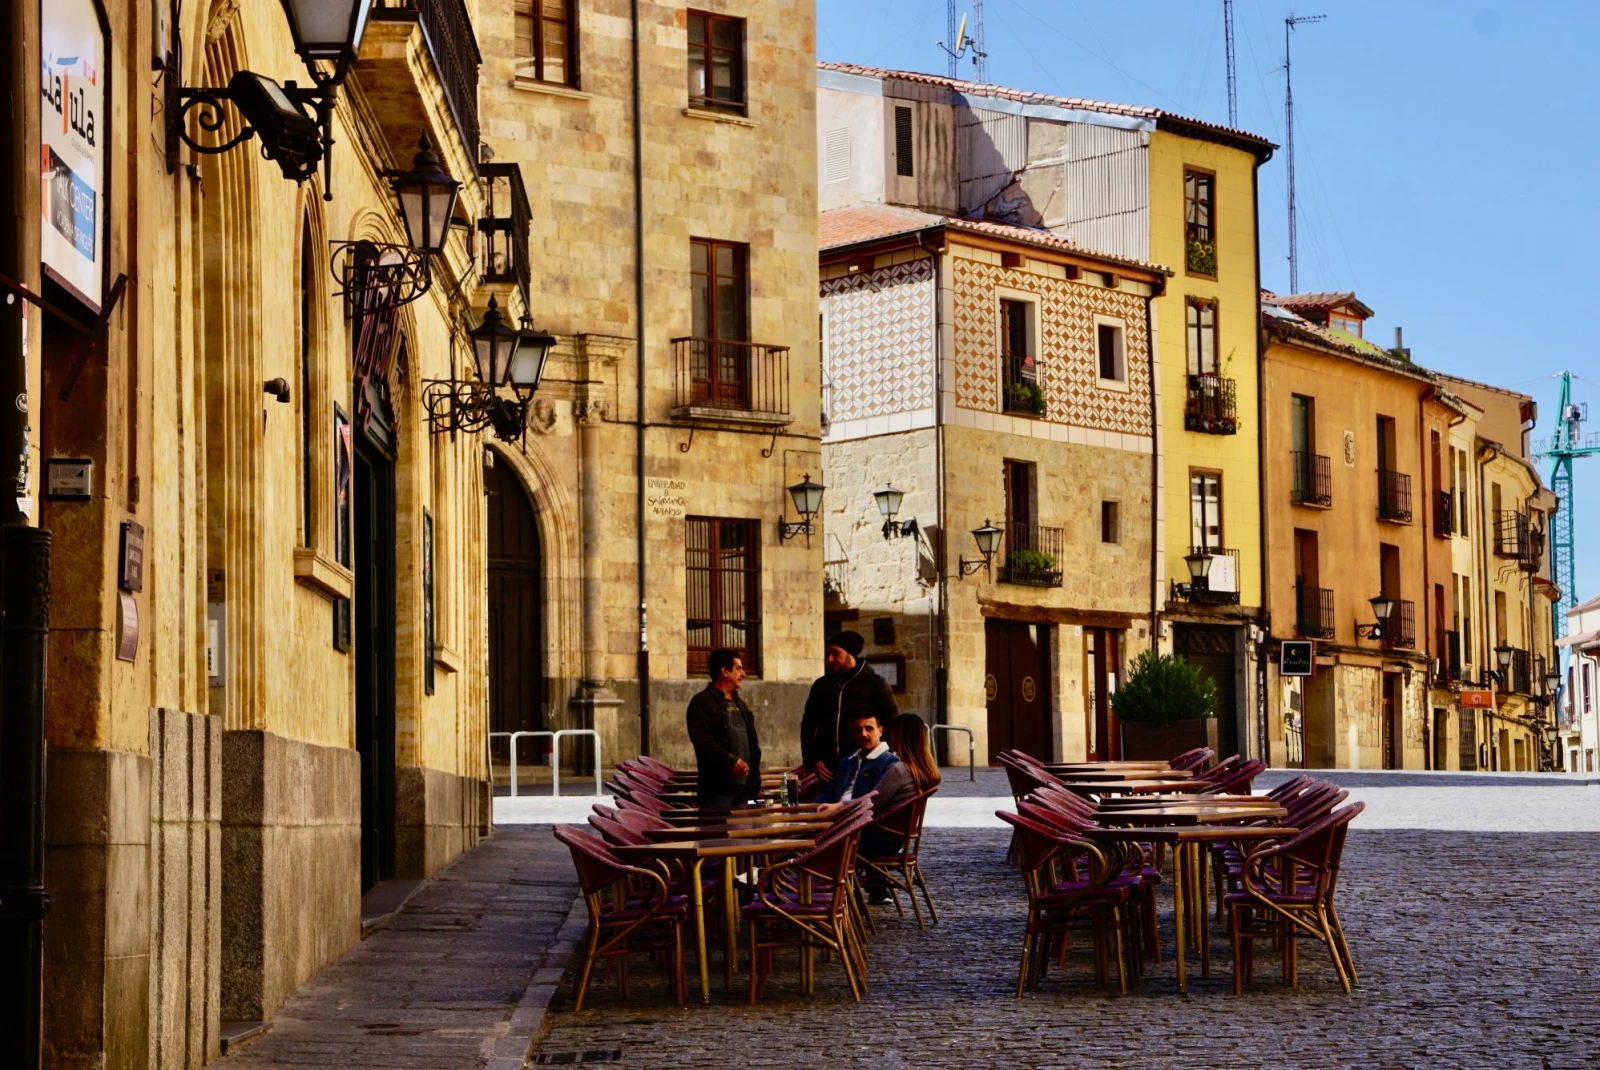 restaurant in the center of the city of Salamanca.